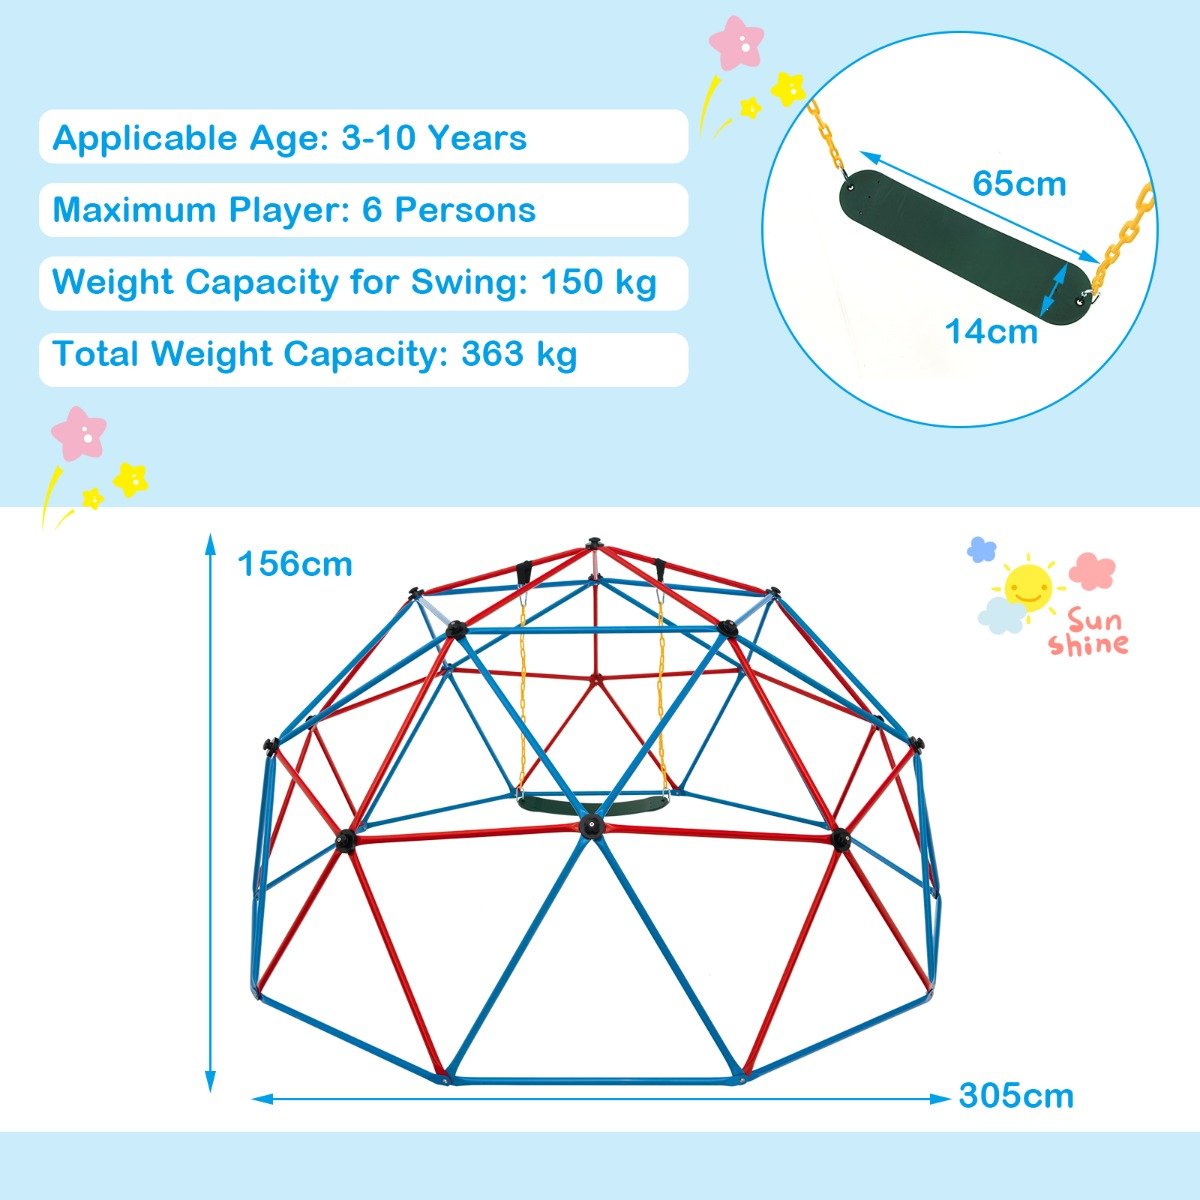 Exciting 3m Geometric Dome Climber with Swing - Outdoor Fun